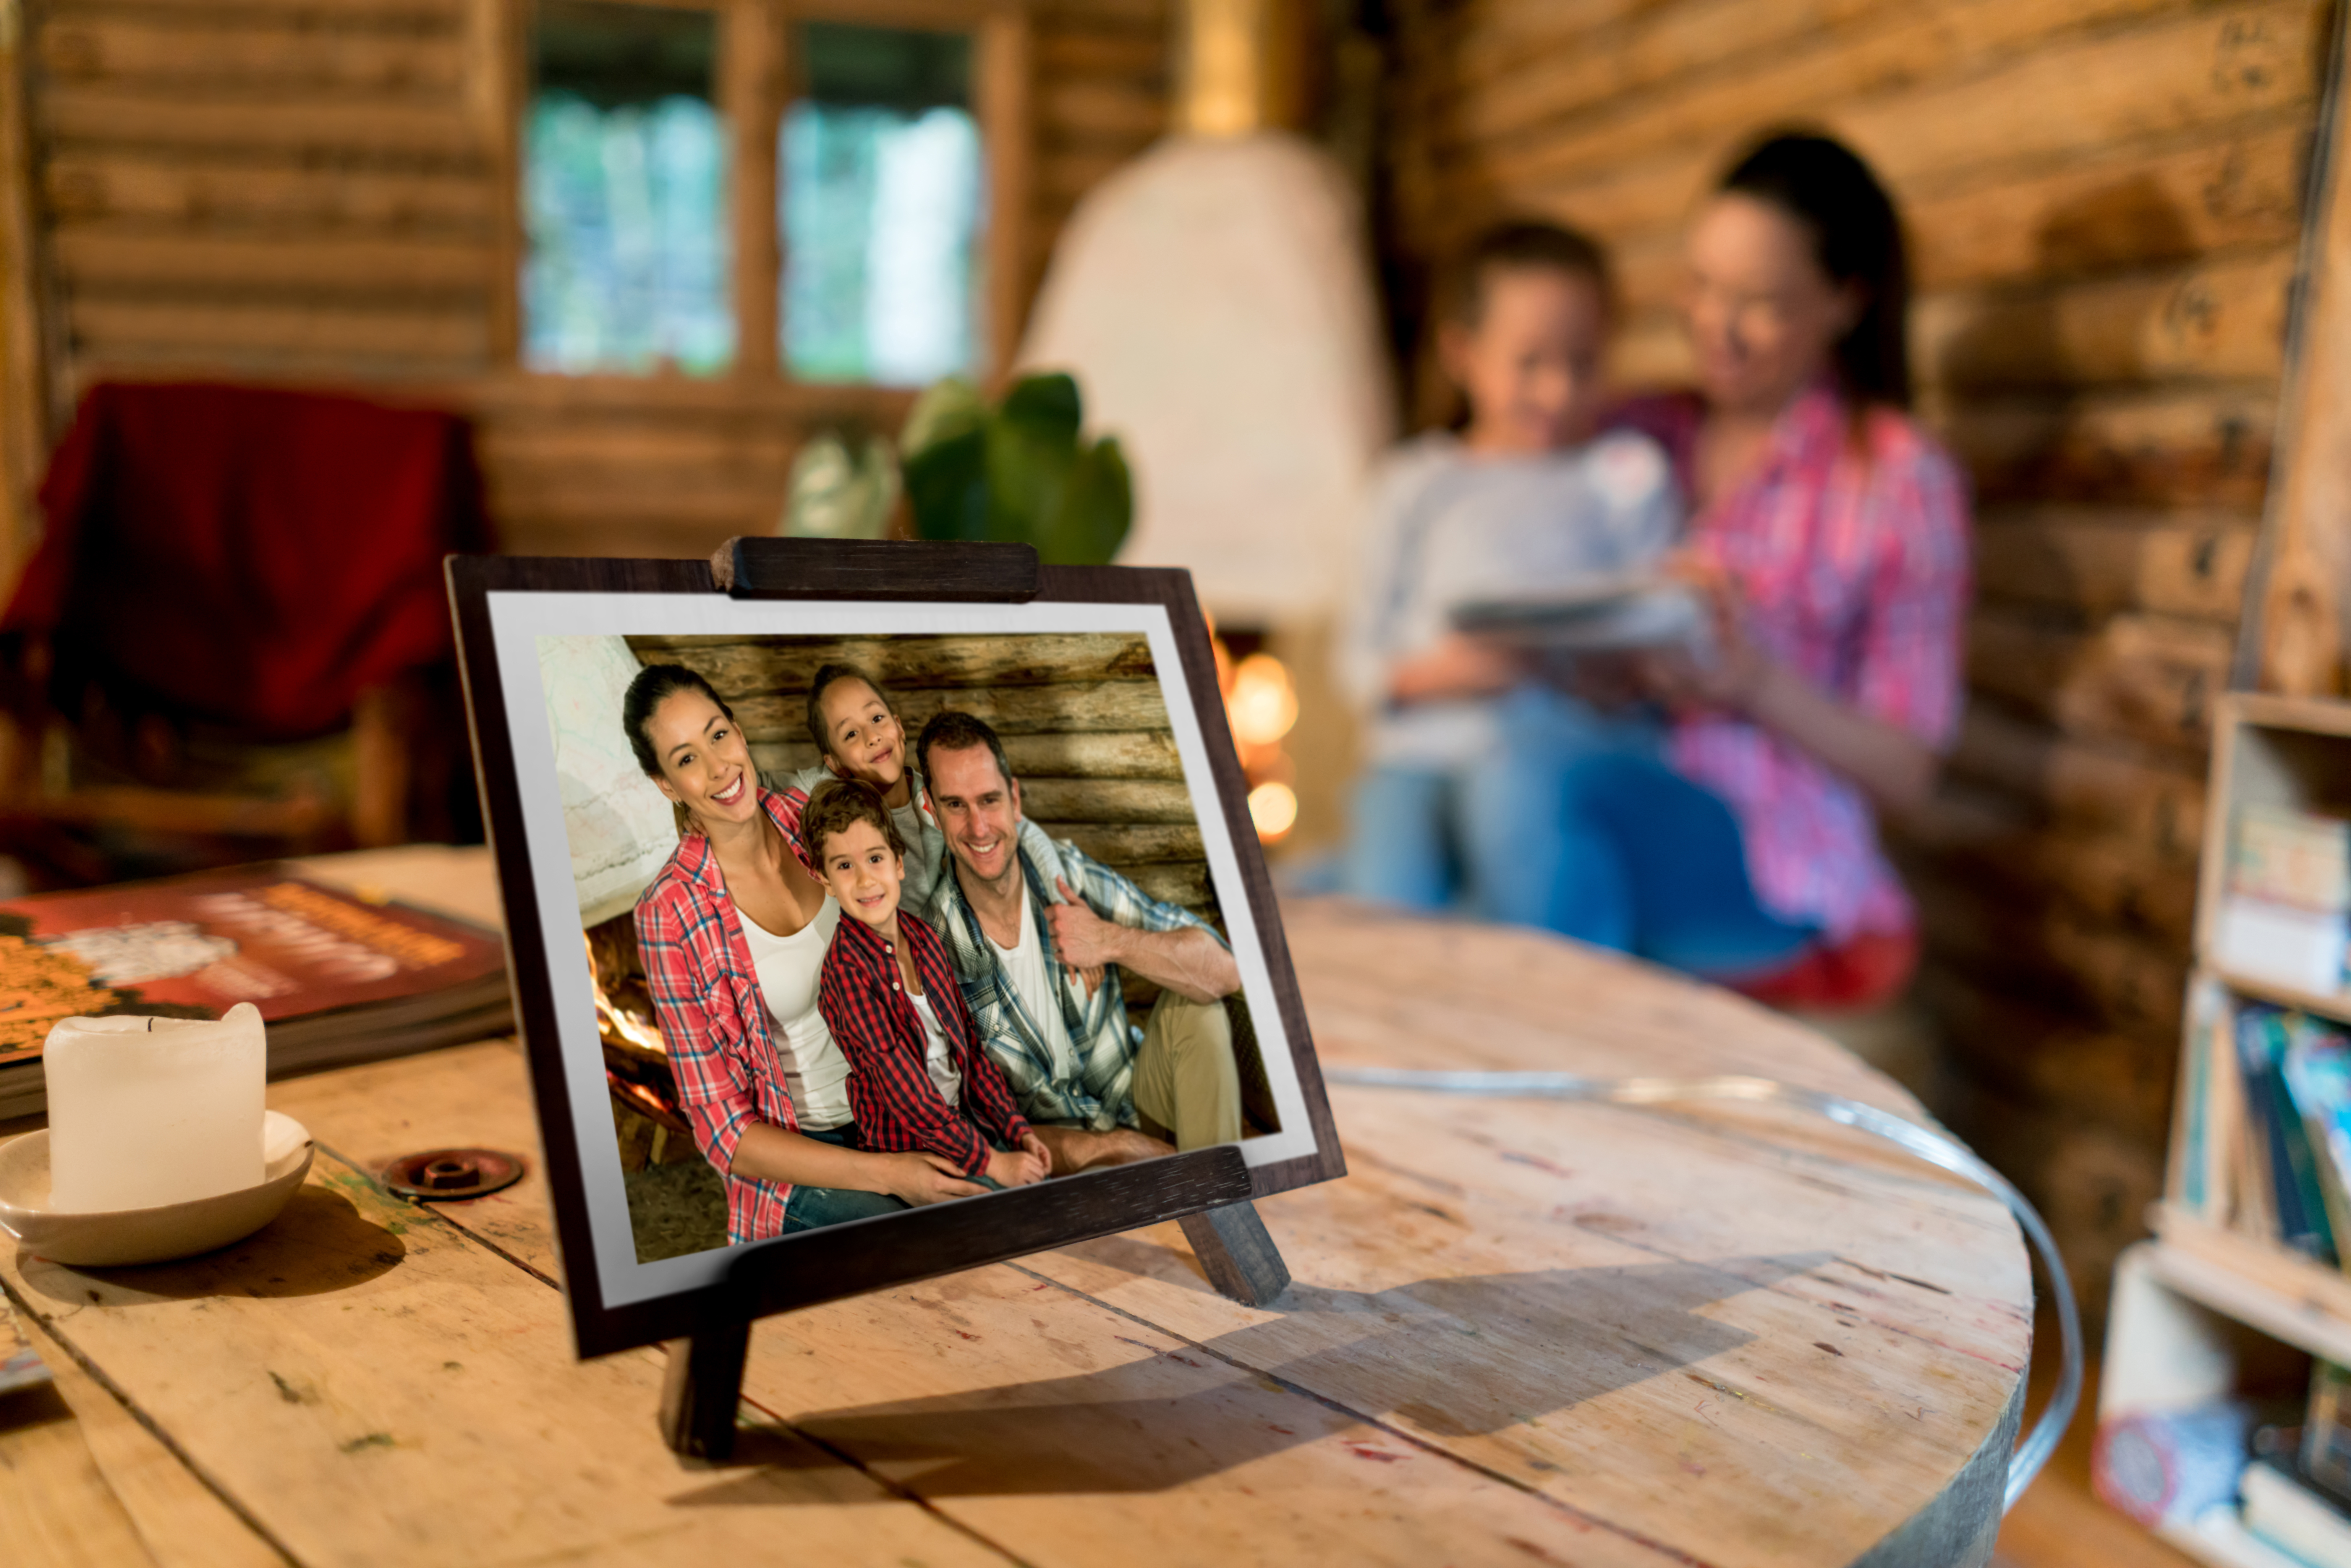 A beautiful family photo in a frame placed on a table | Source: Getty Images